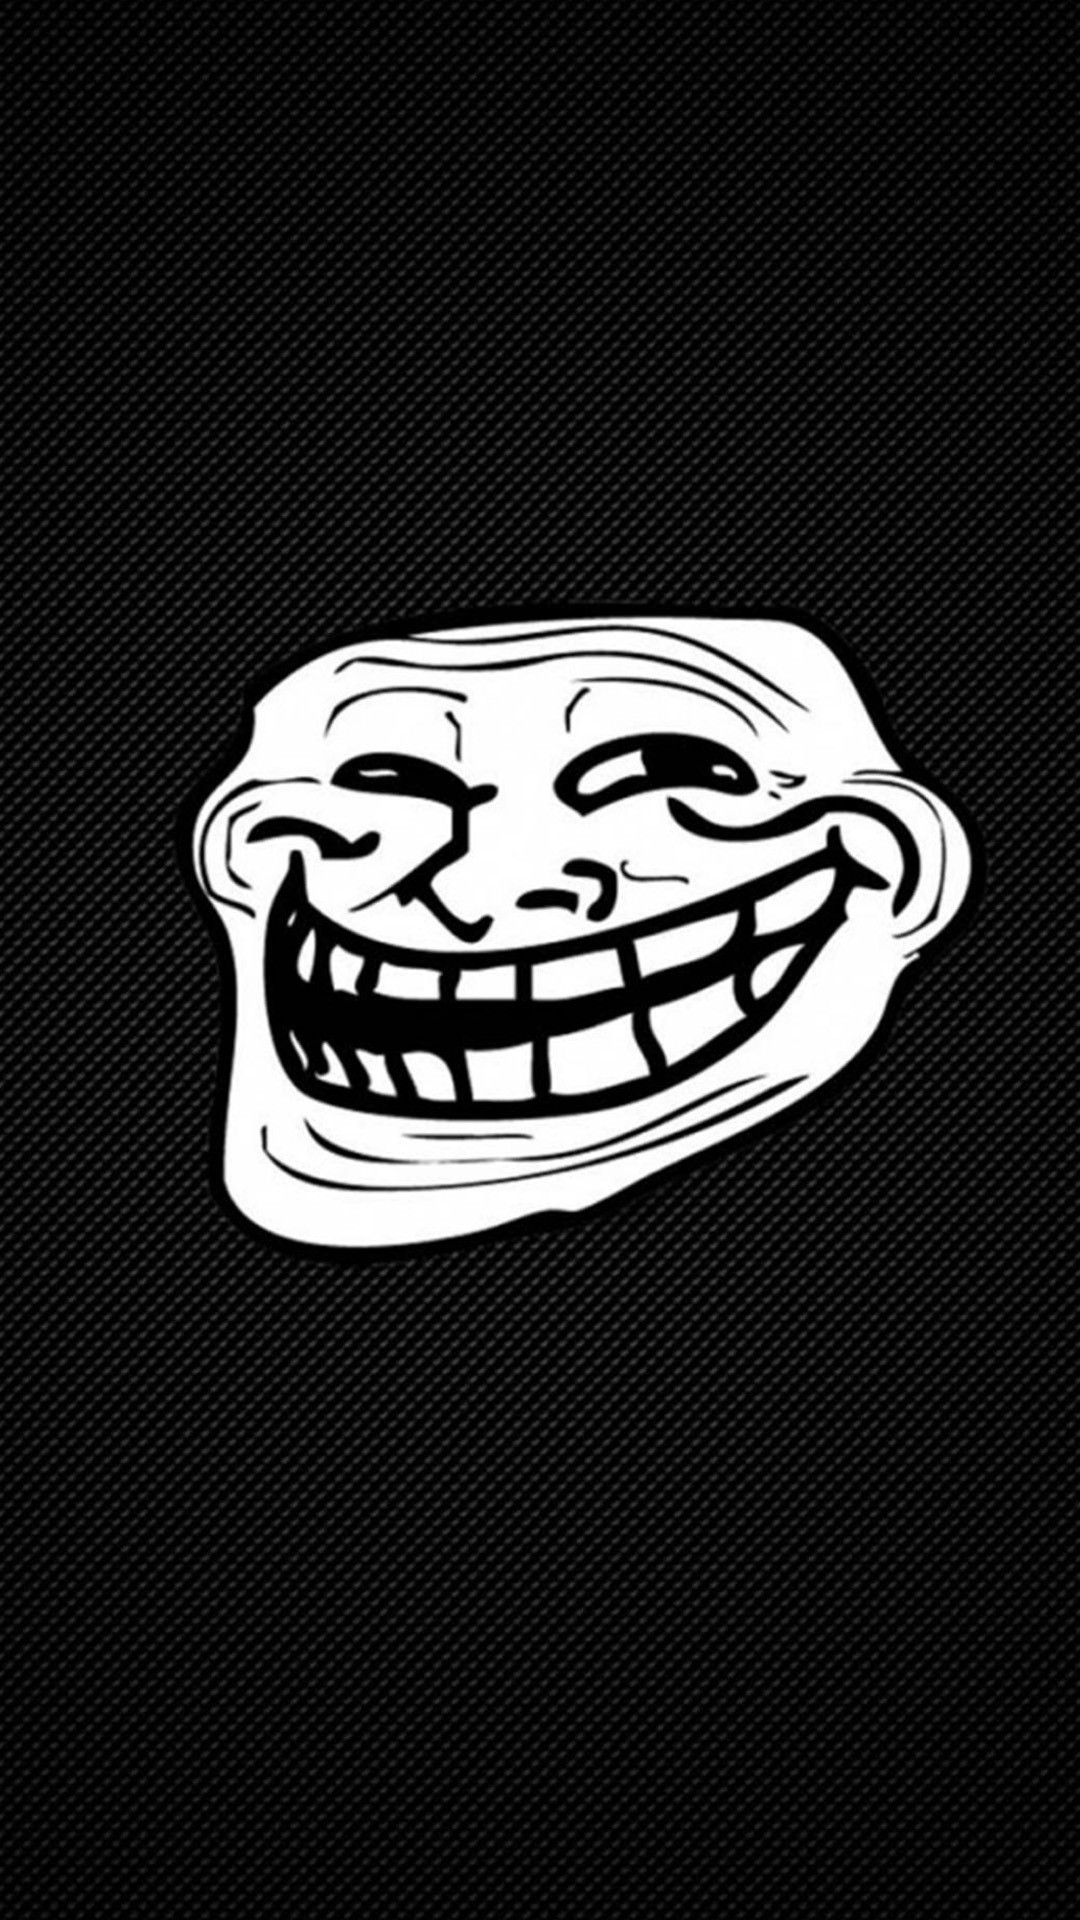 1080x1920 Funny iPhone 6 Plus Wallpapers - Troll Face Illustration Drawing .